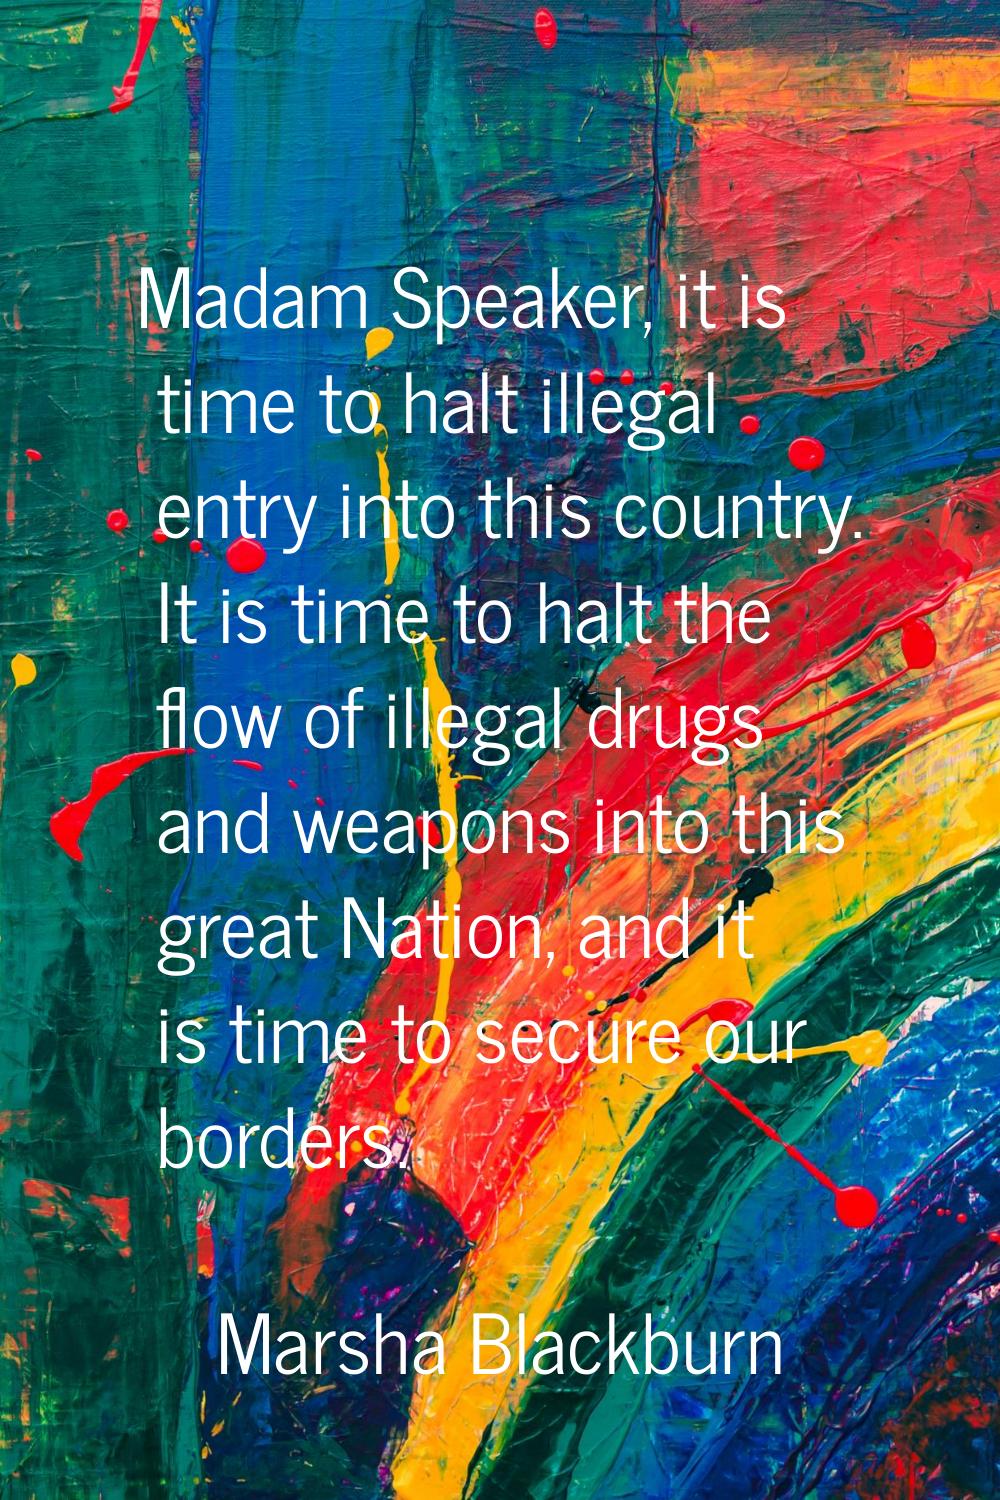 Madam Speaker, it is time to halt illegal entry into this country. It is time to halt the flow of i